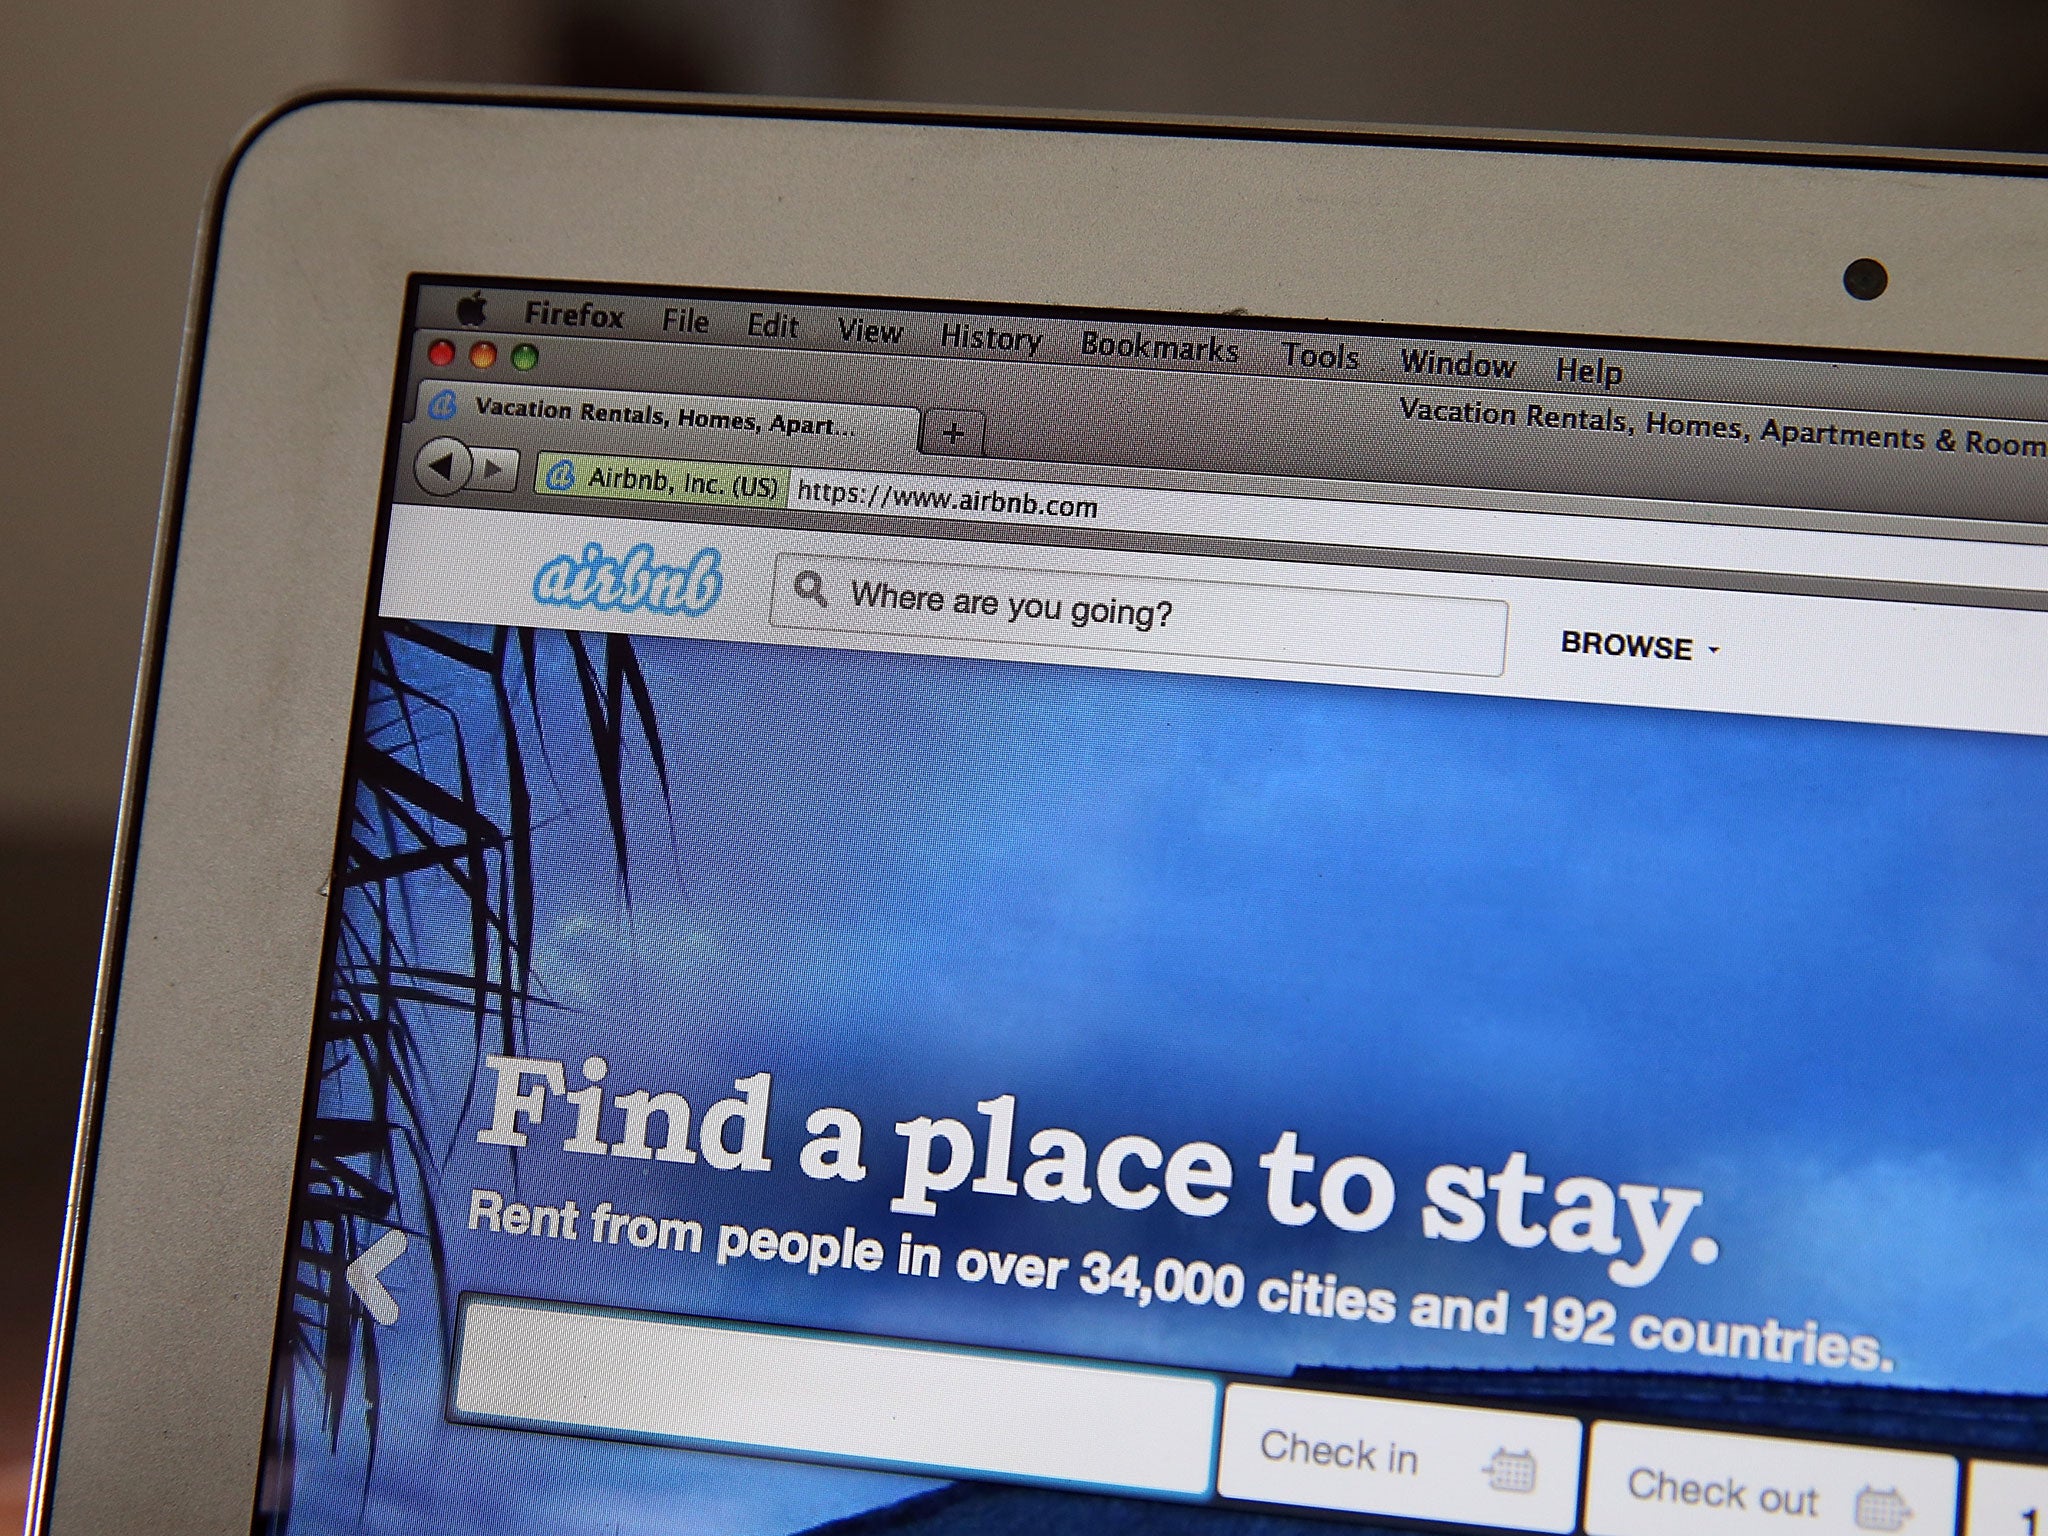 An Airbnb user was allegedly sexually assaulted by a host in July